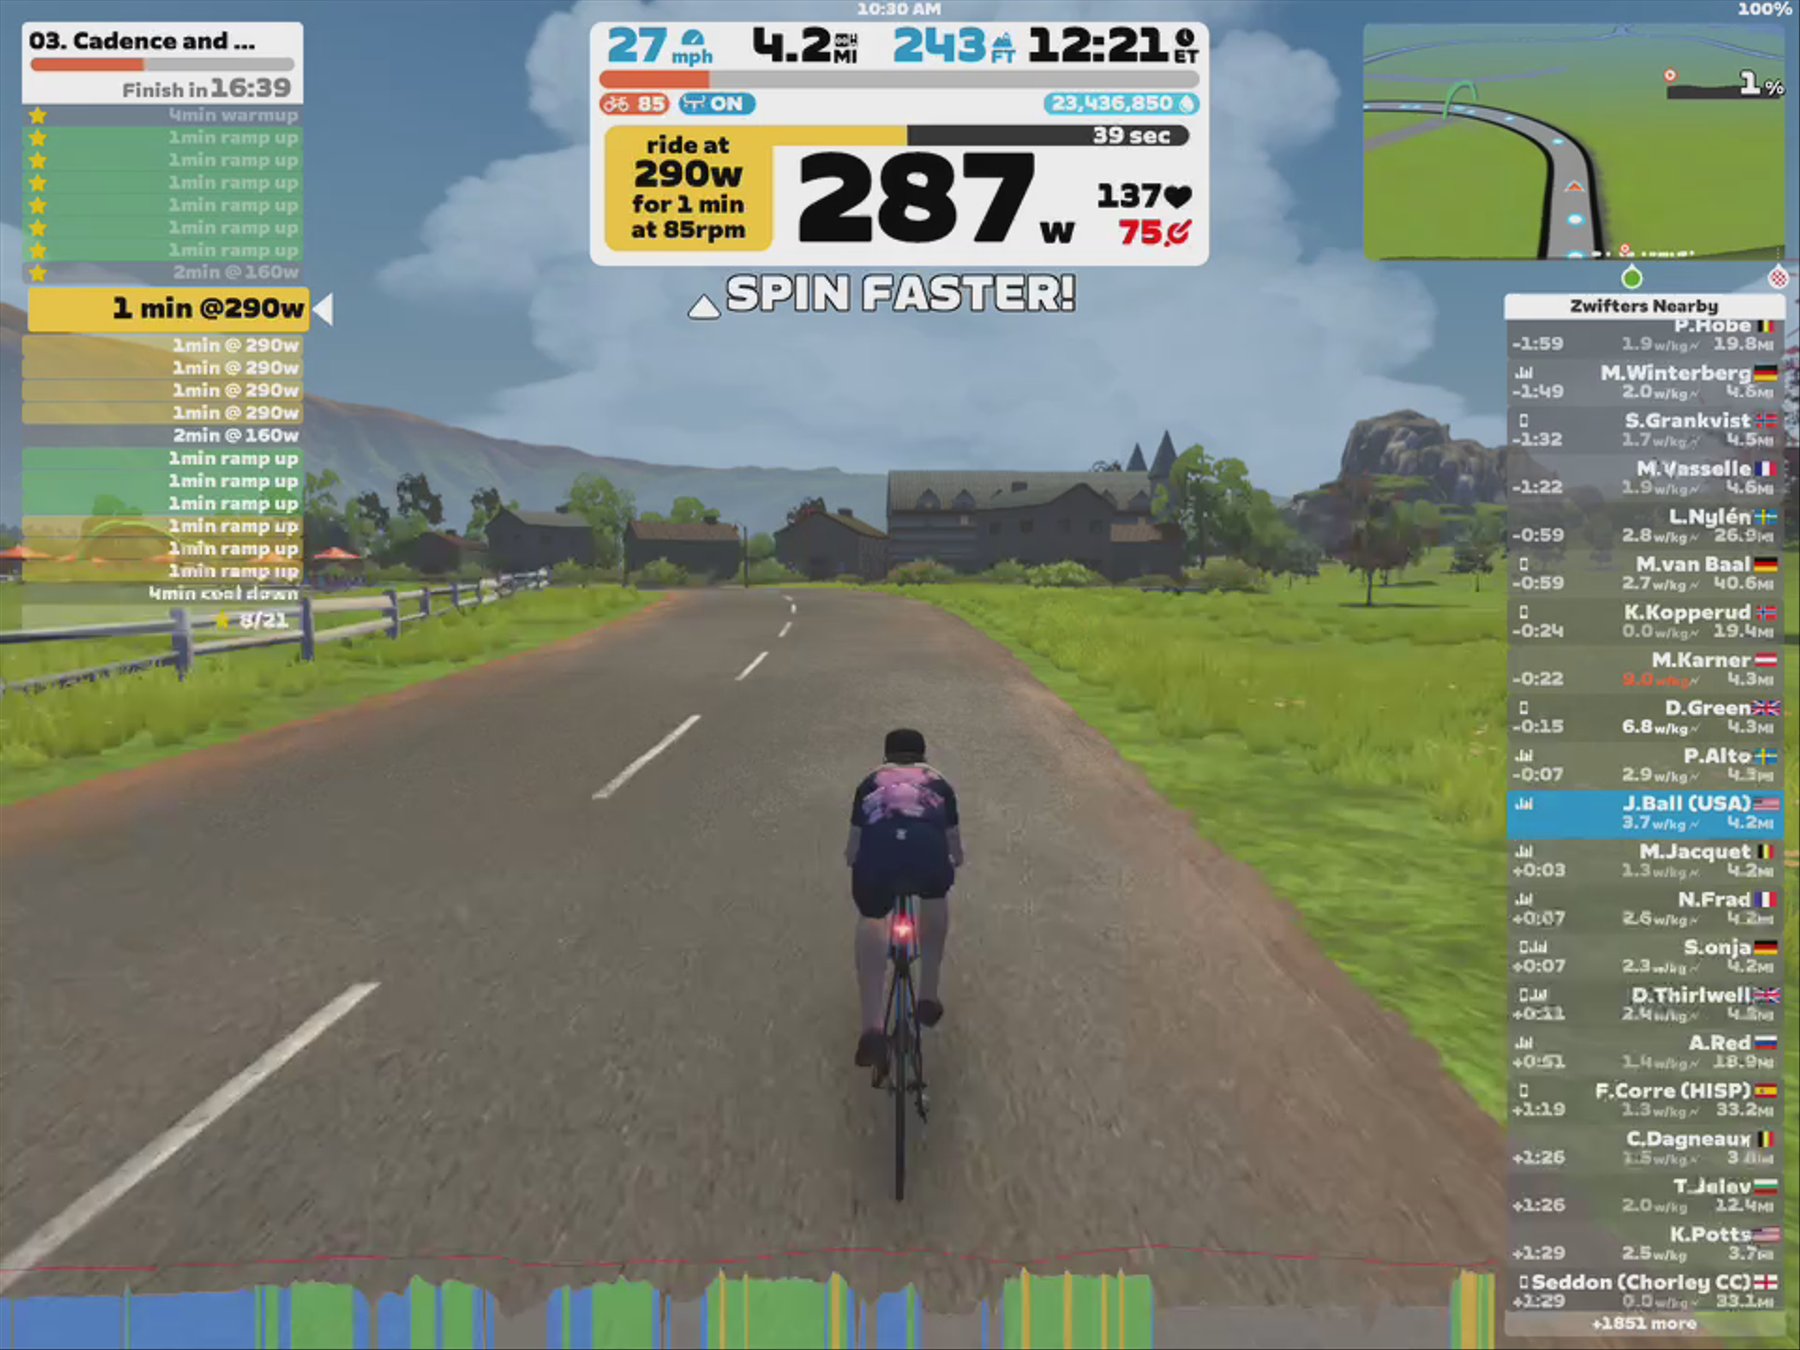 Zwift - 03. Cadence and Cruise [Lite] in France